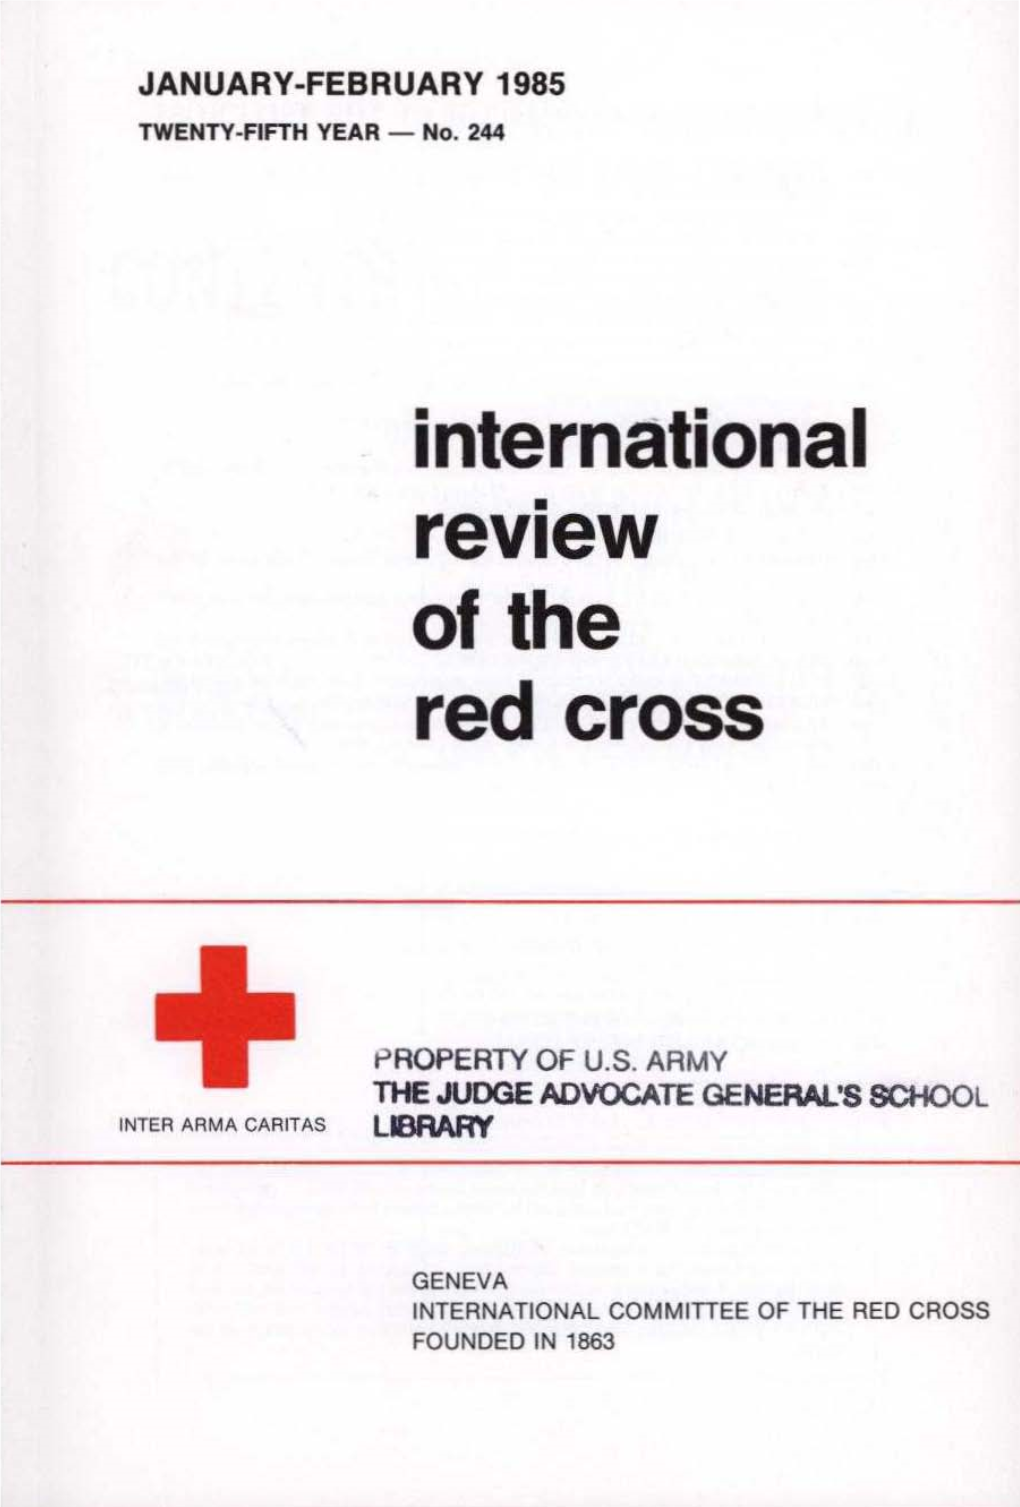 International Review of the Red Cross, January-February 1985